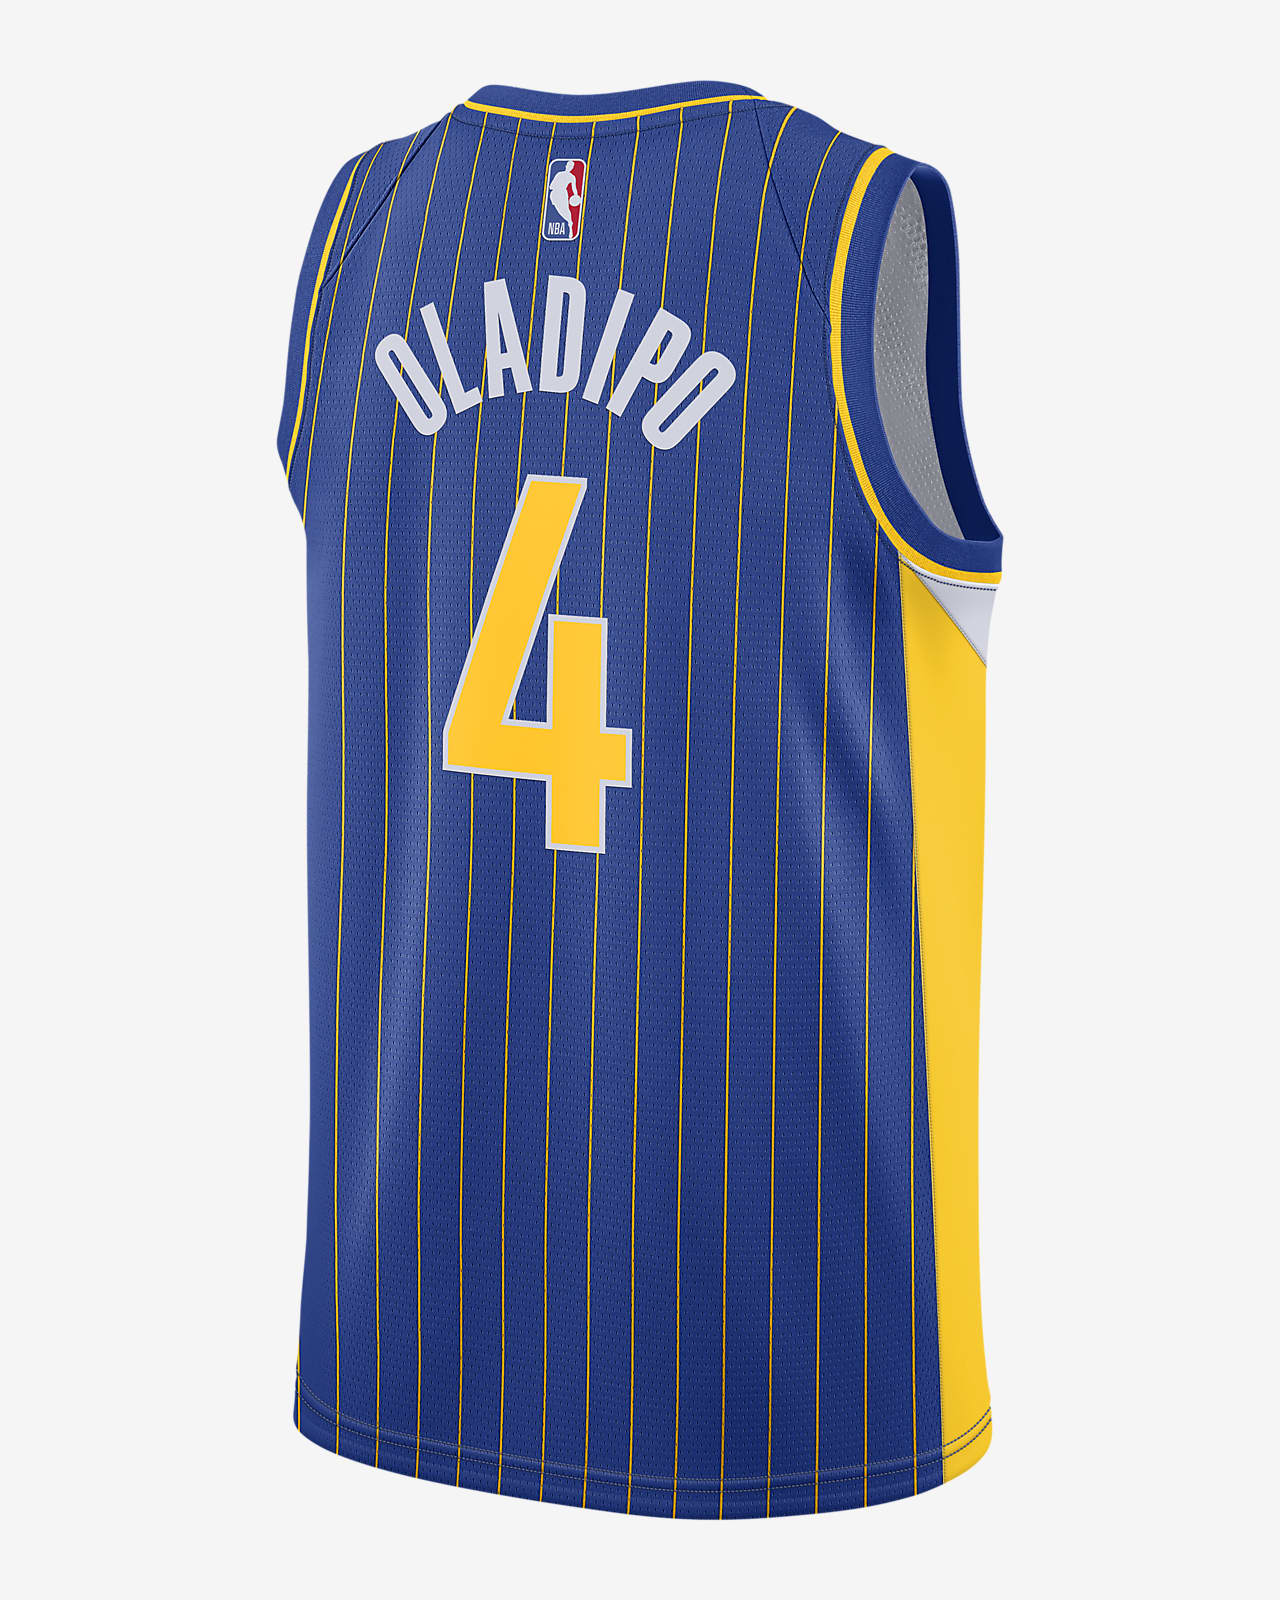 pacers jersey city edition